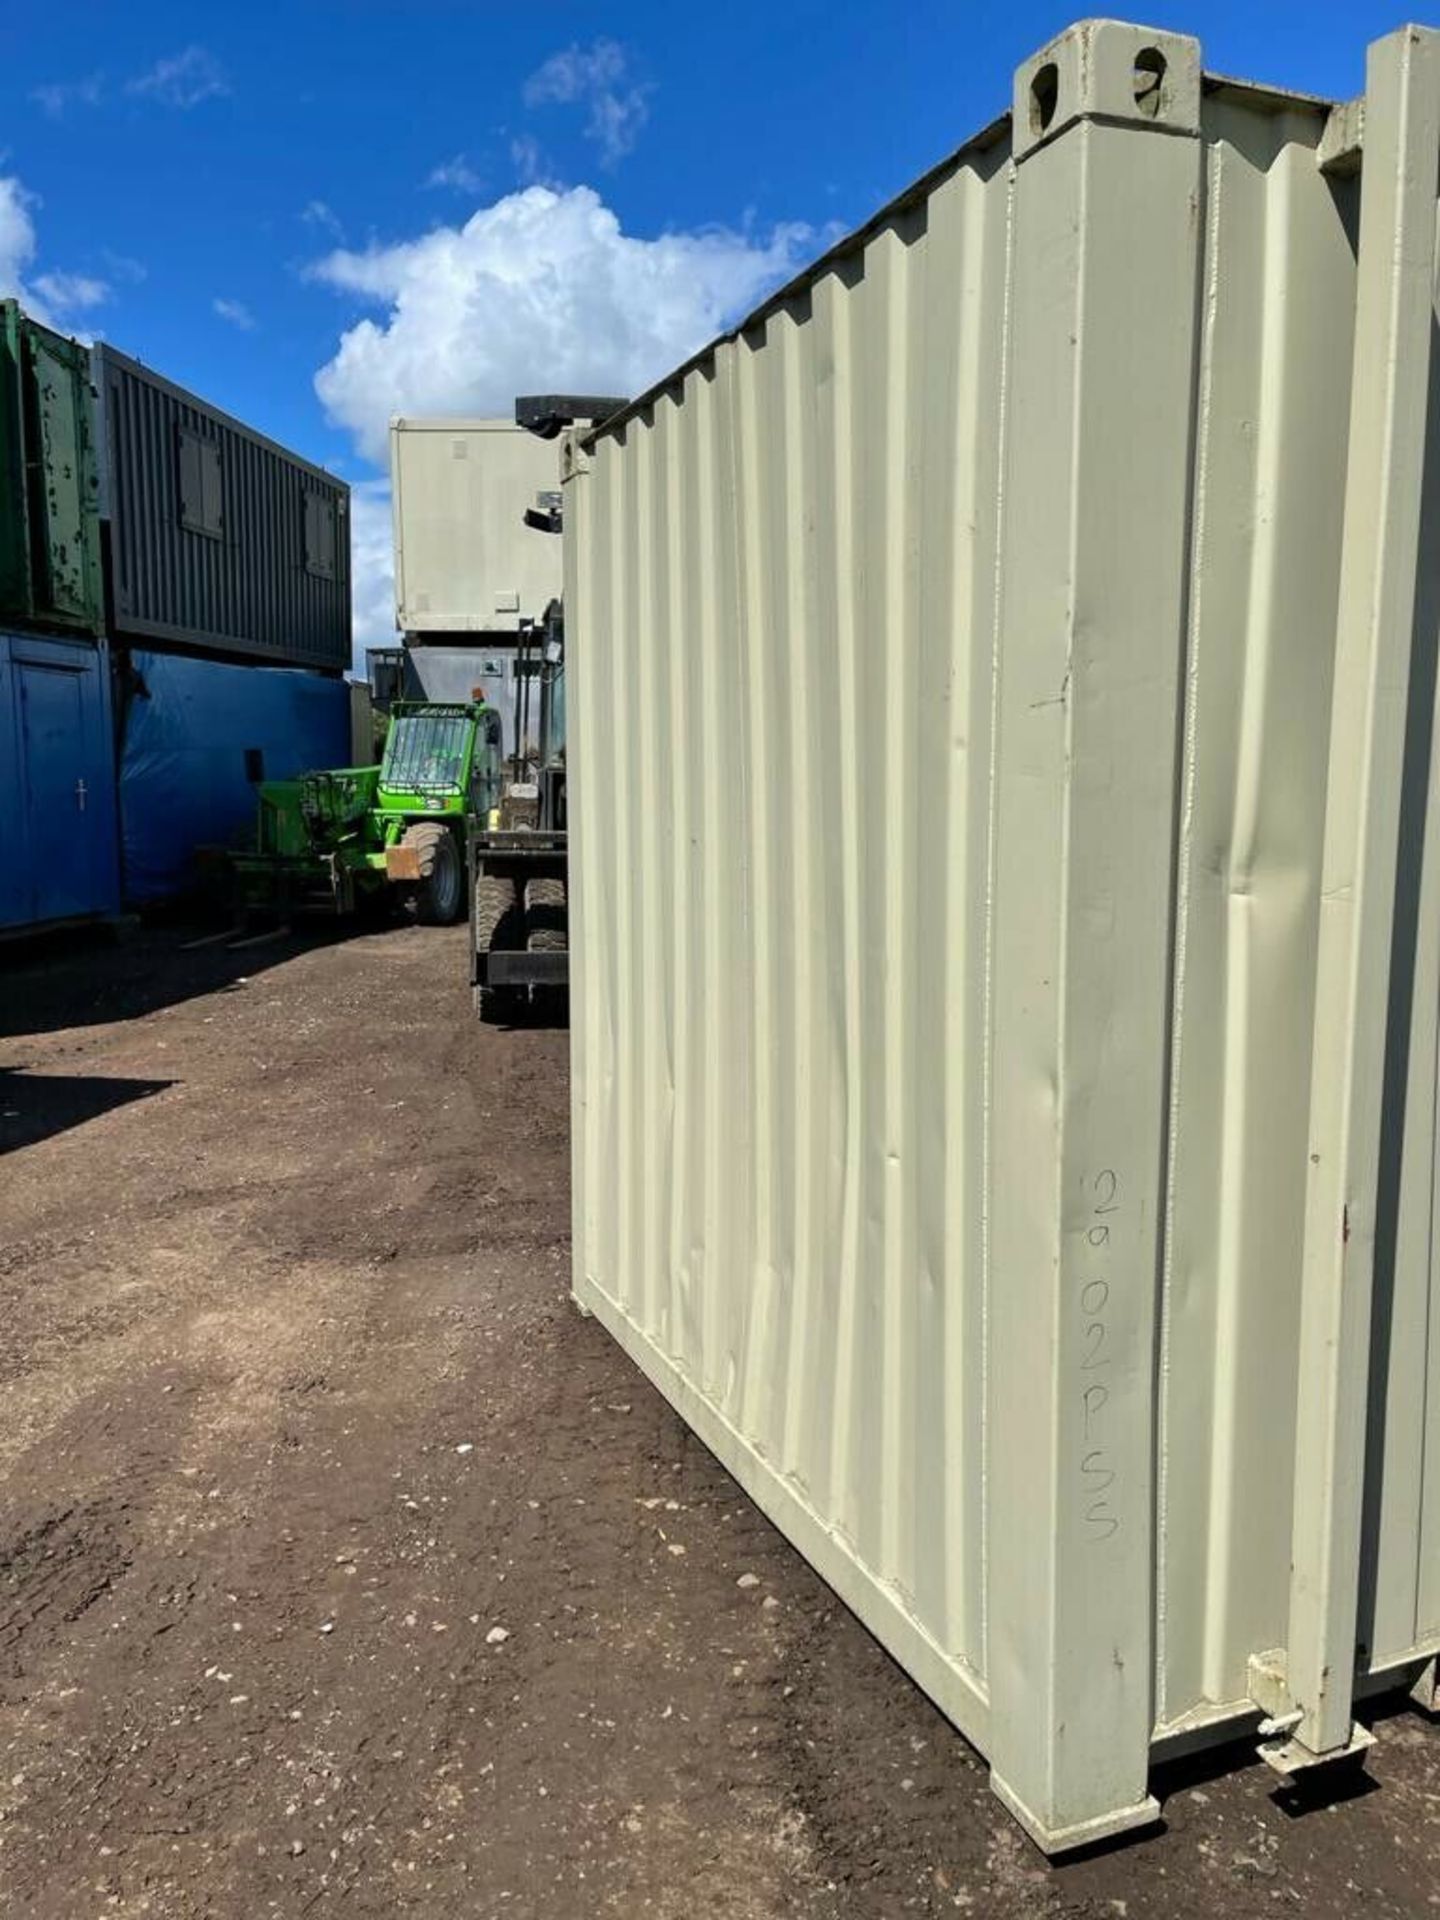 Anti Vandal Steel Storage Container 20ft x 8ft - Image 4 of 5